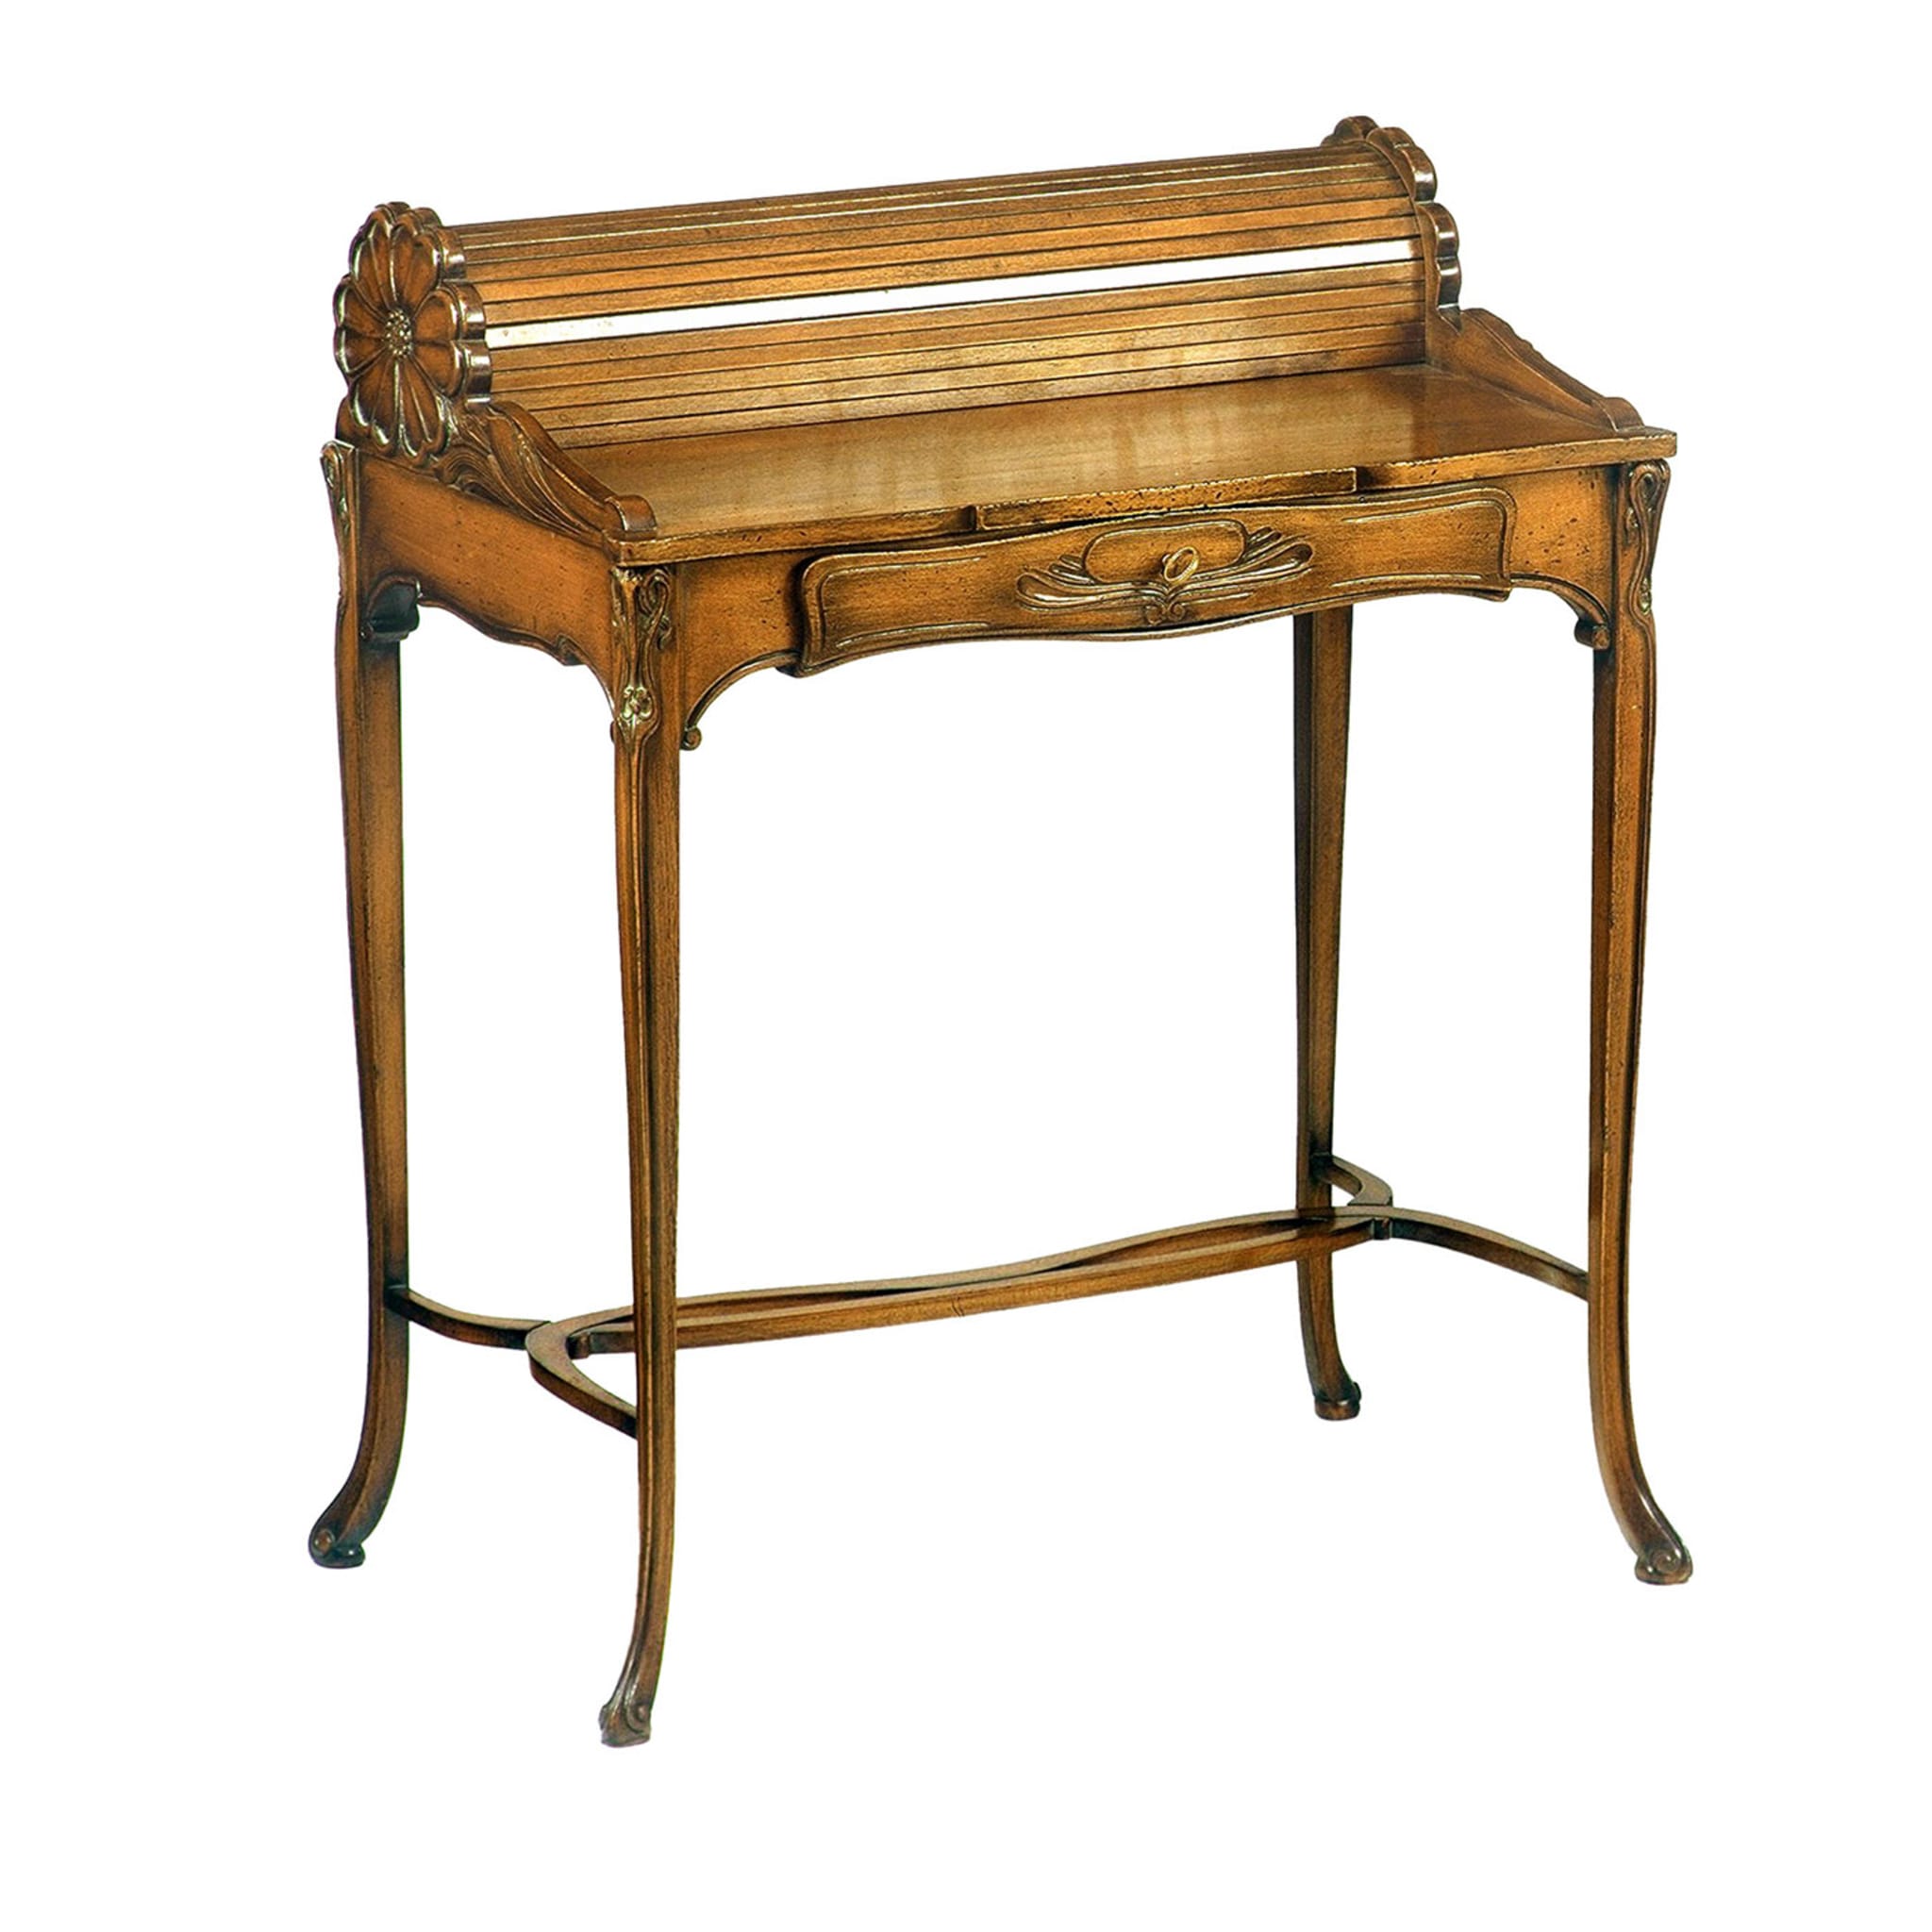 French Art Nouveau-Style Roll-Top Writing Desk - Main view